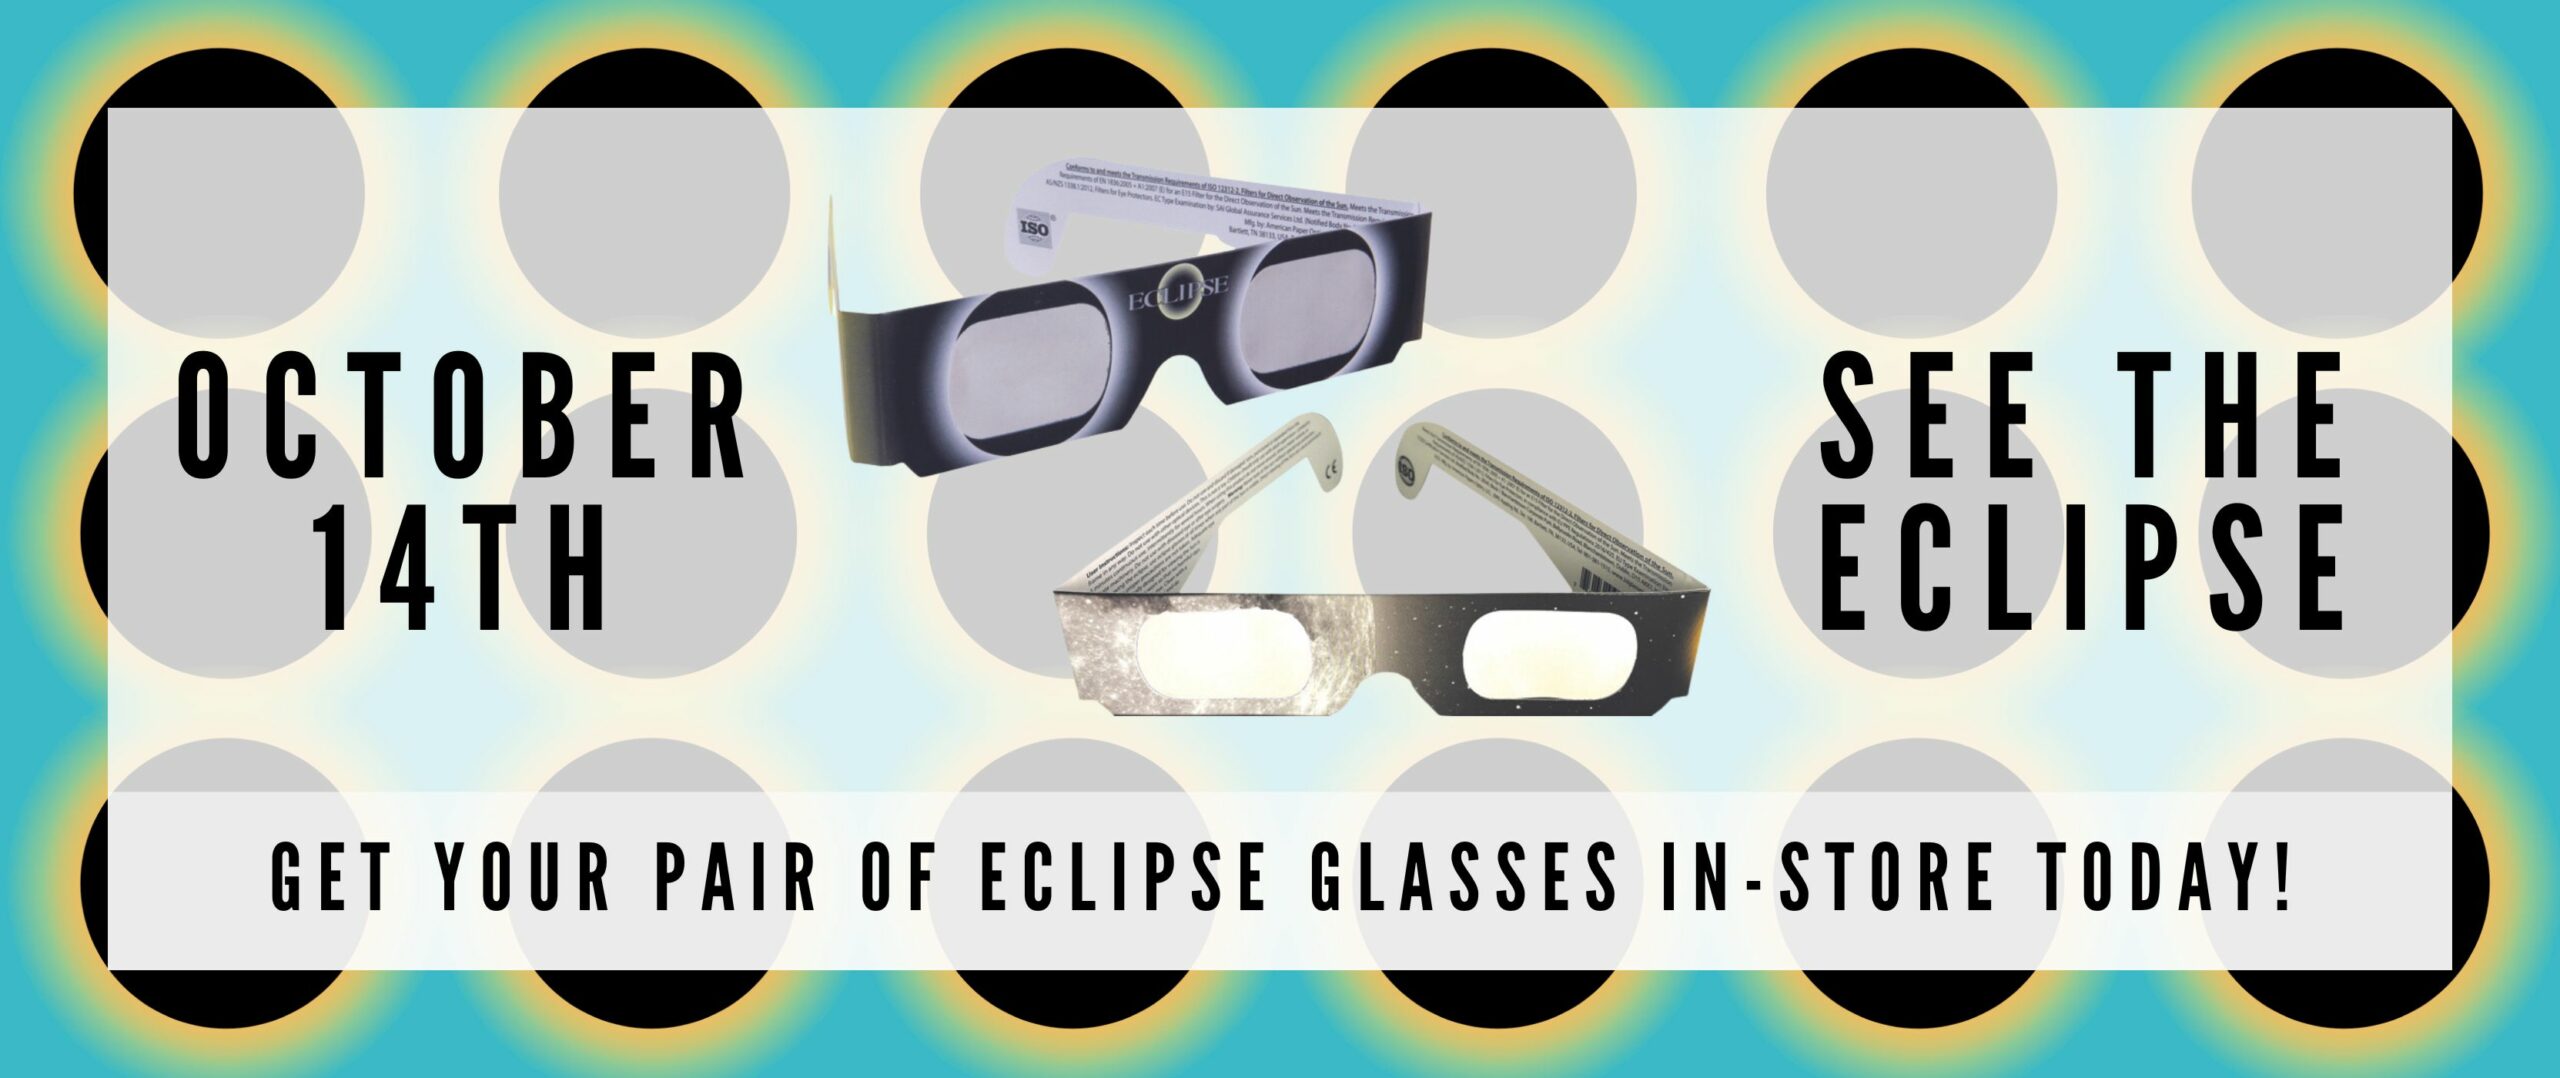 Protect Your Eyes with Proper Eclipse-Viewing Glasses for Only $2.49!